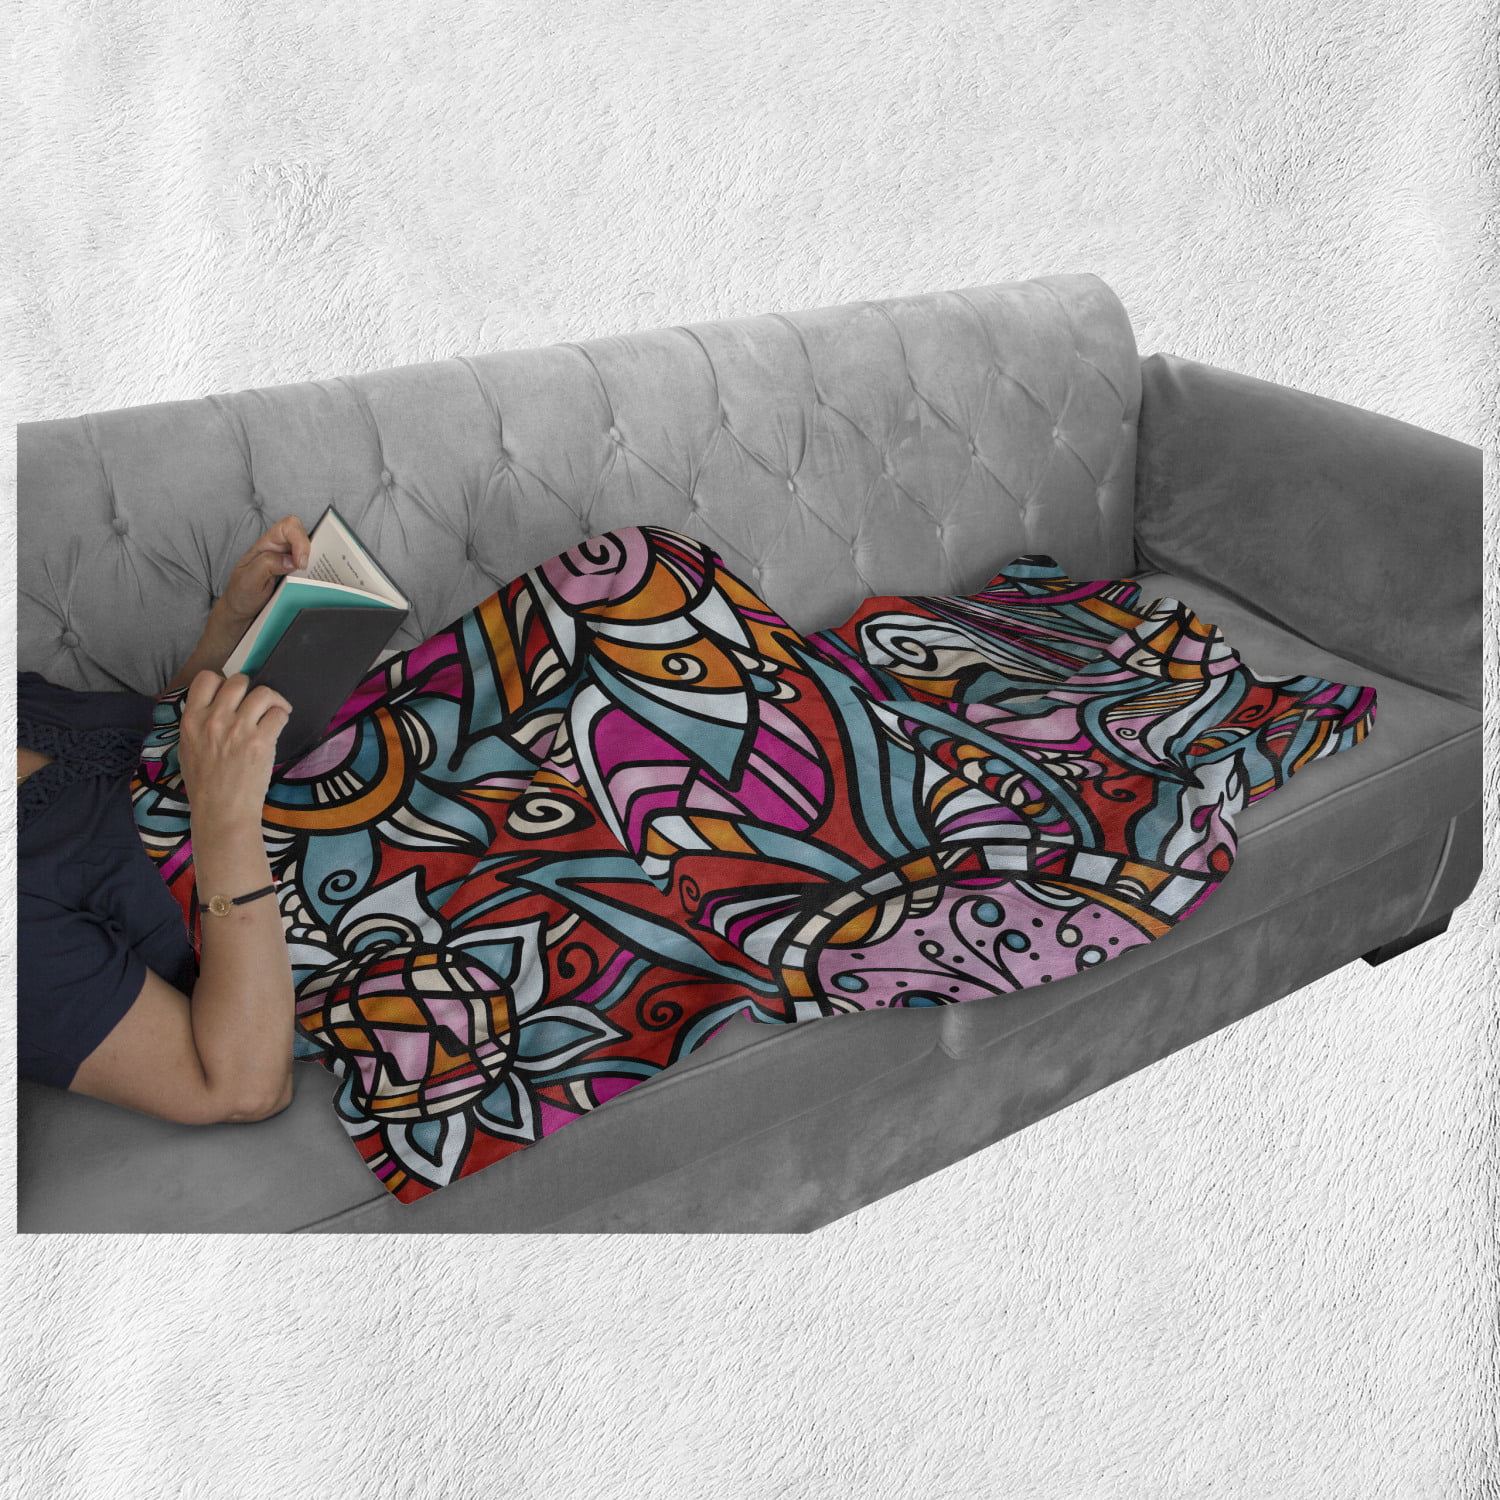 Cozy Plush for Indoor and Outdoor Use 50 x 60 Ambesonne Urban Graffiti Soft Flannel Fleece Throw Blanket Multicolor Abstract Graffiti of Shaded Floral Design Style Overlapping Flowers